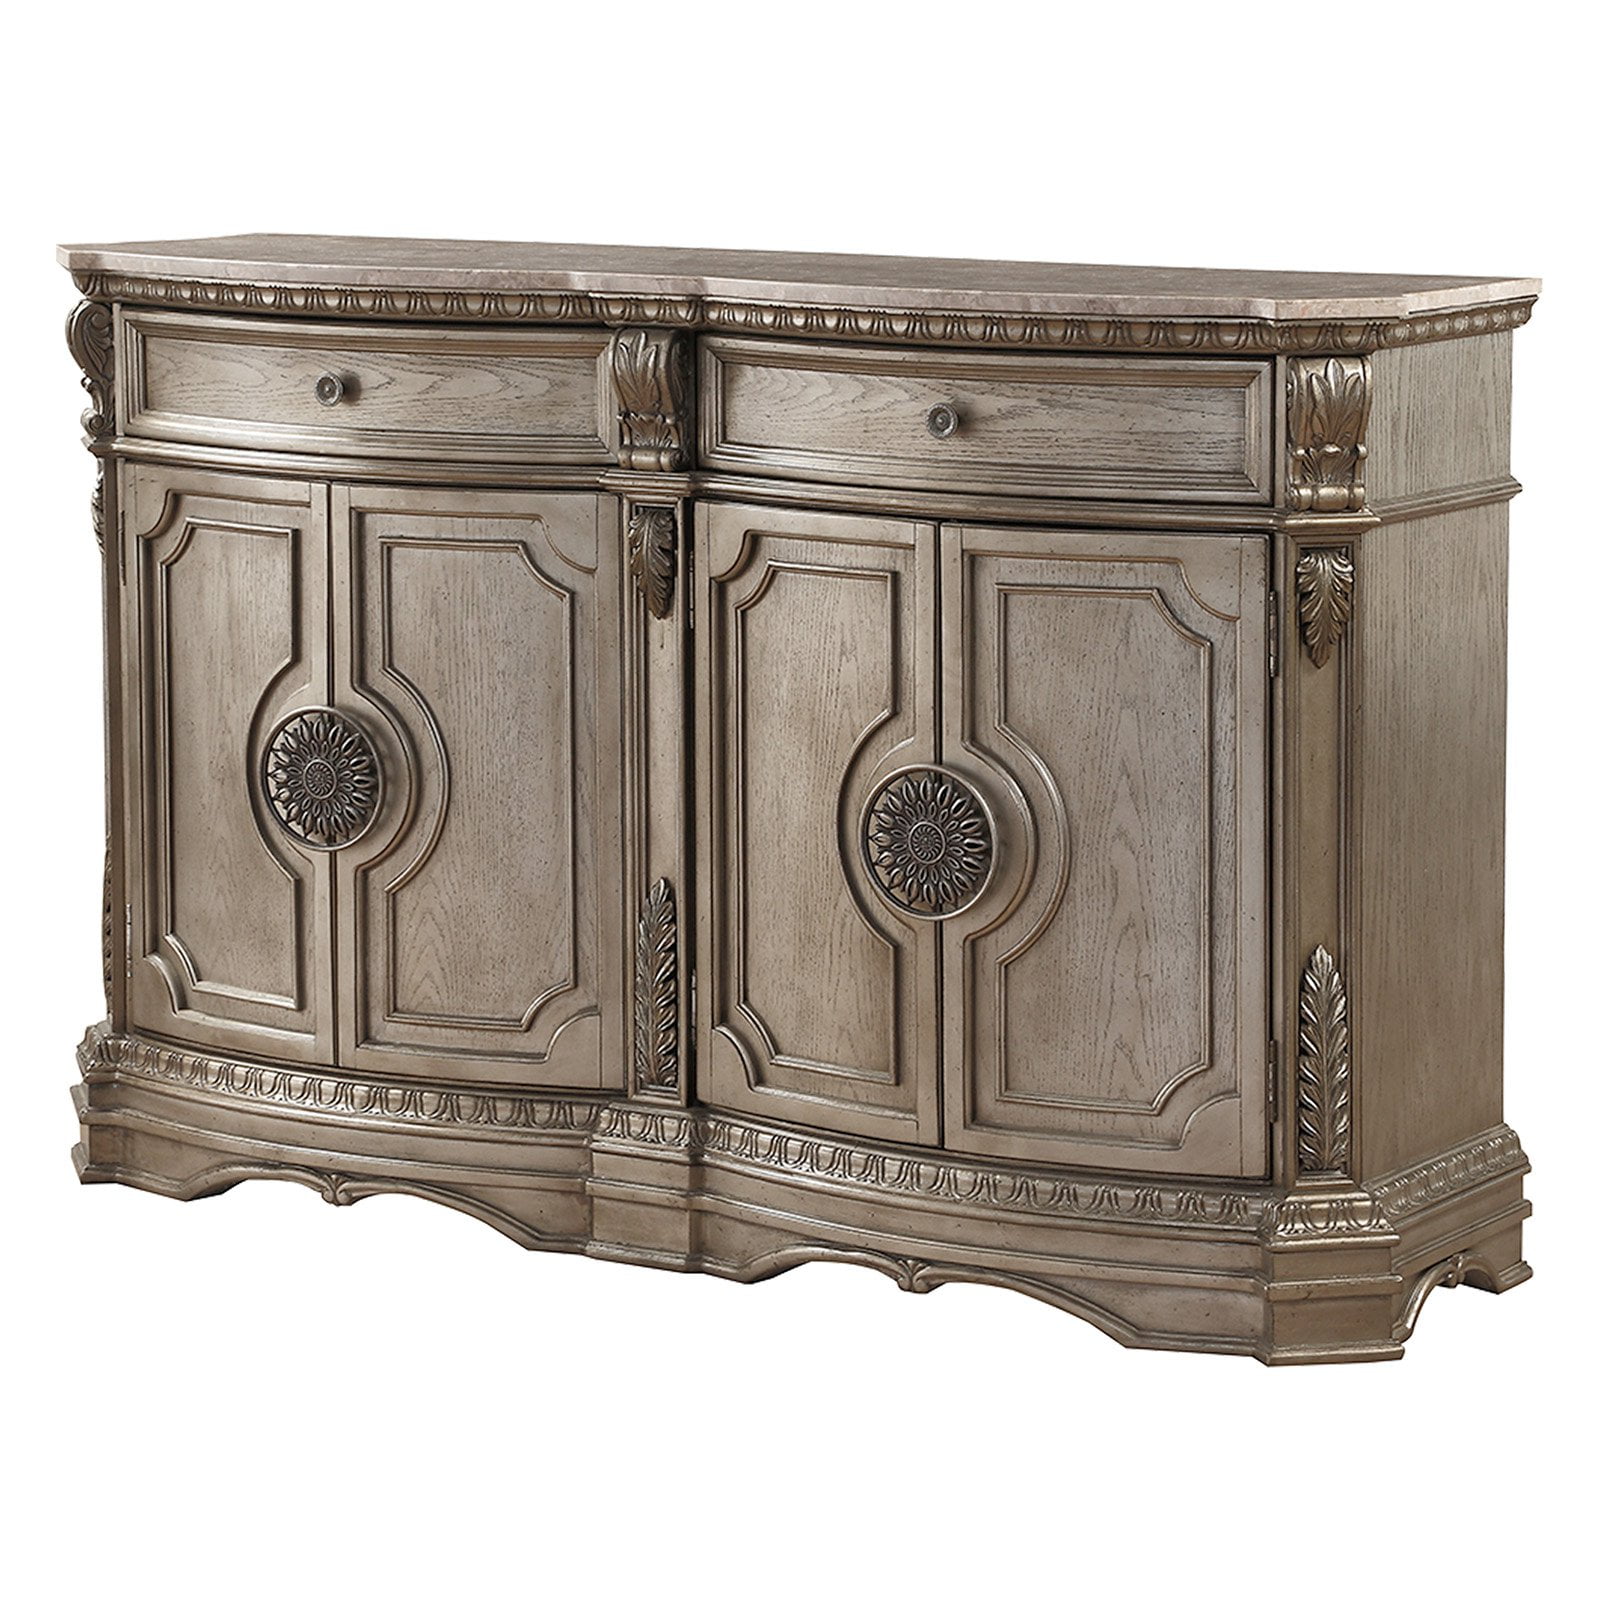 Picture of ACME 66925 Northville Server with Marble Top - Antique Champagne - 42 x 68 x 19 in.